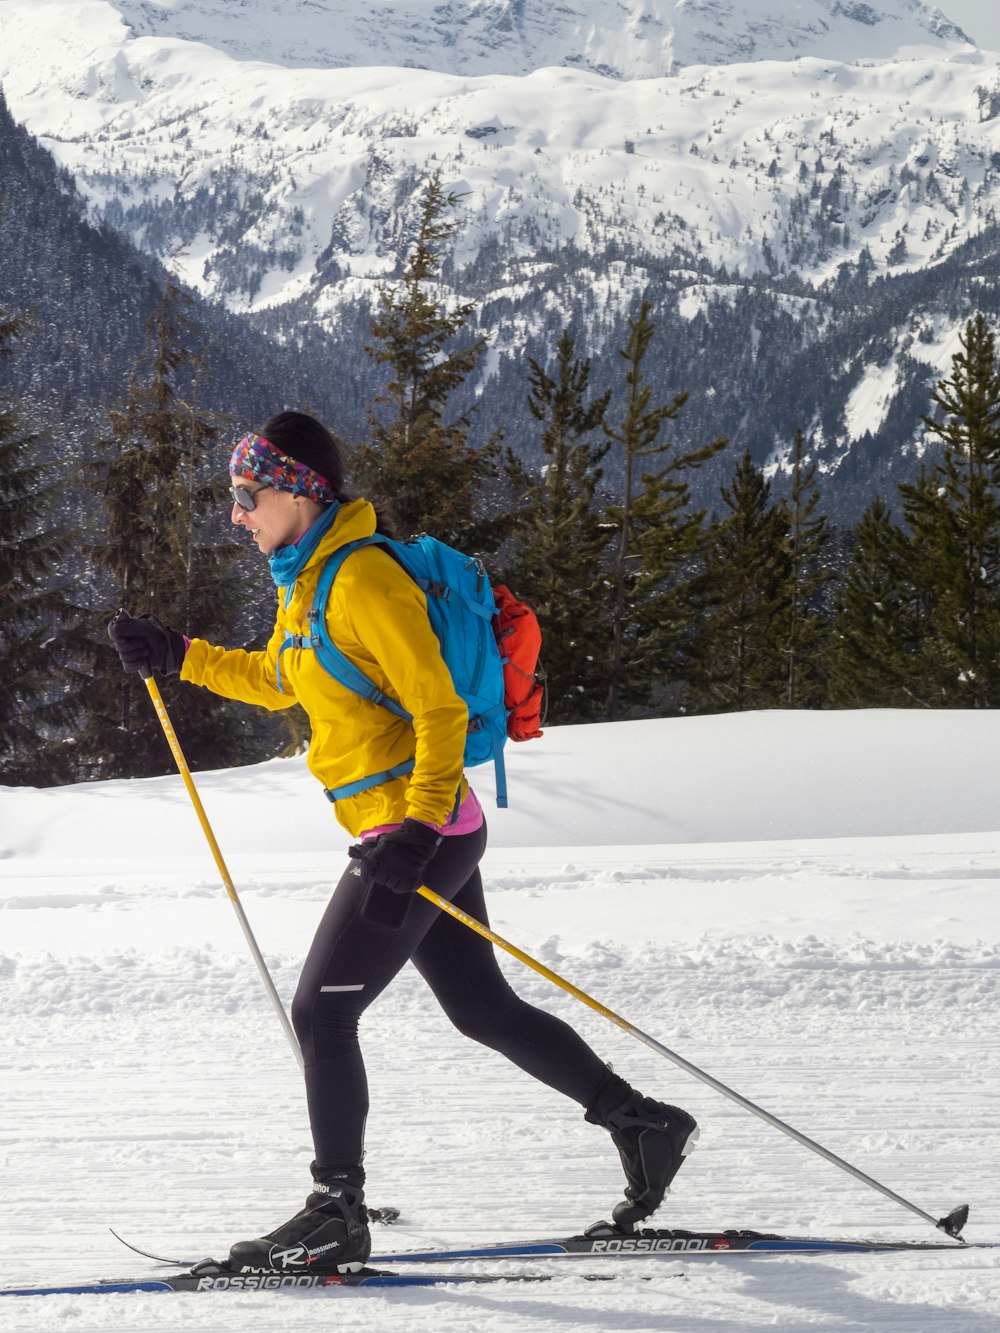 a person on skis in the snow with mountains in the background